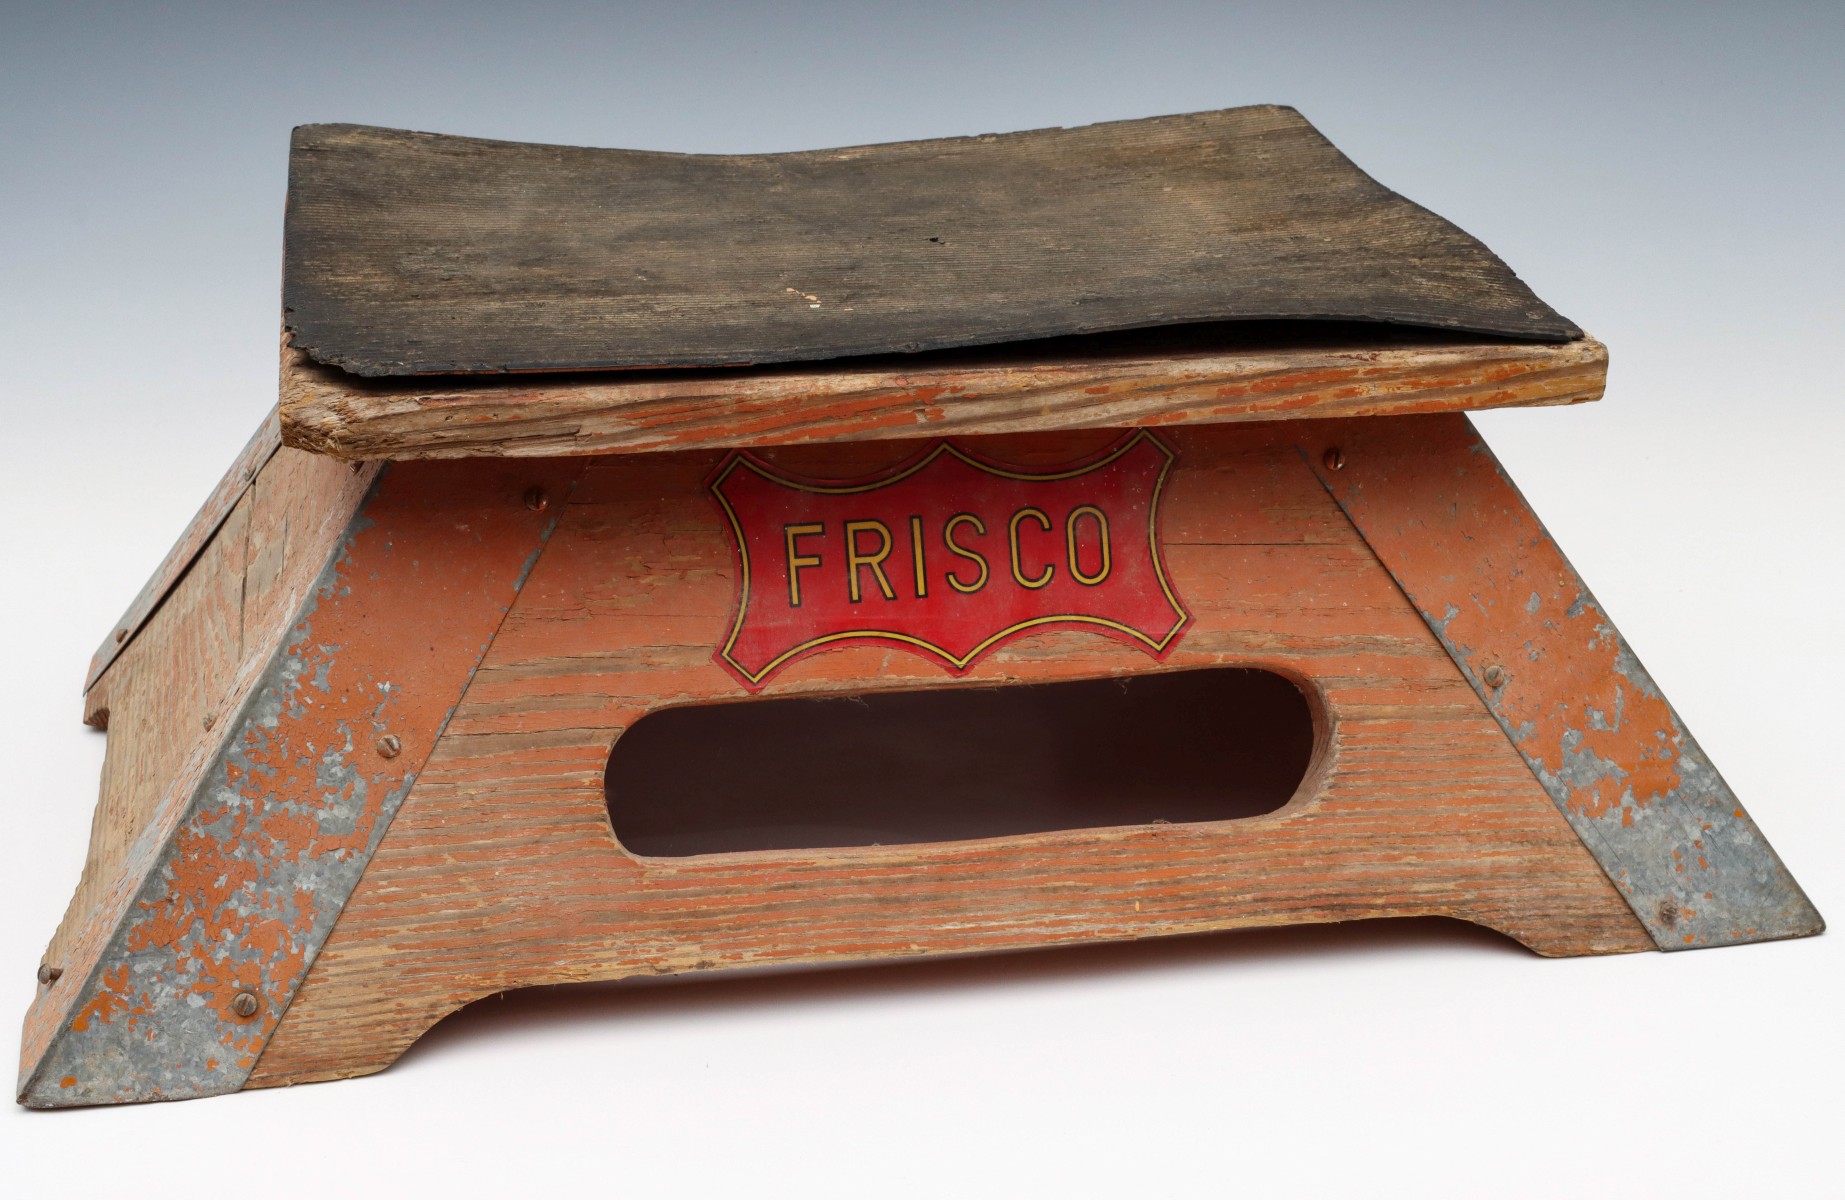 A FRISCO STEP BOX WITH ORIGINAL PAINT AND DECAL